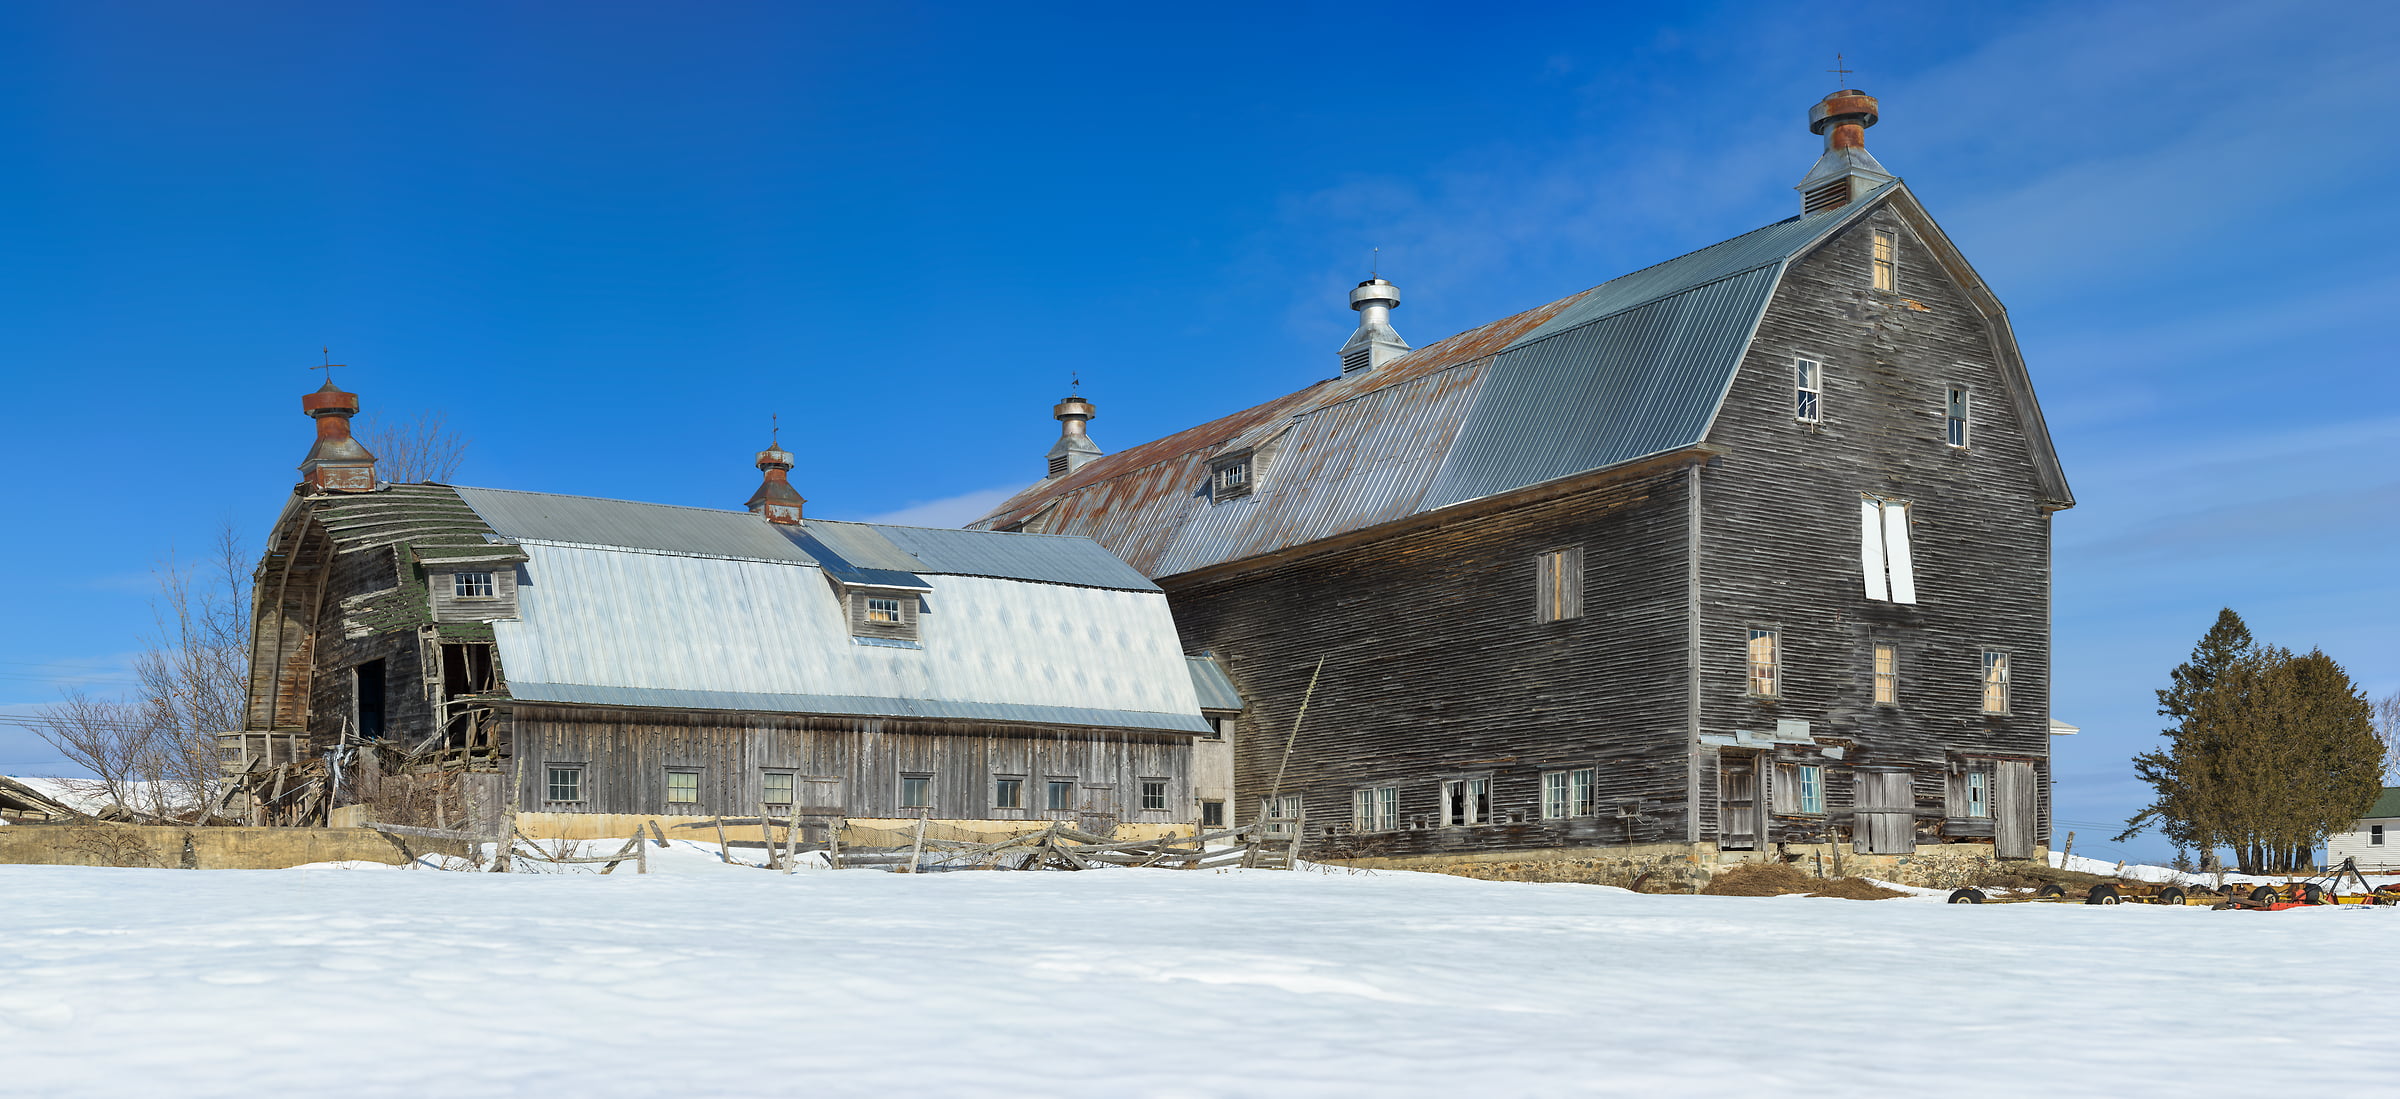 1,012 megapixels! A very high resolution, large-format VAST photo of a farm house in snow in winter in New England; fine art landscape photograph created by Aaron Priest in Stacyville, Maine.